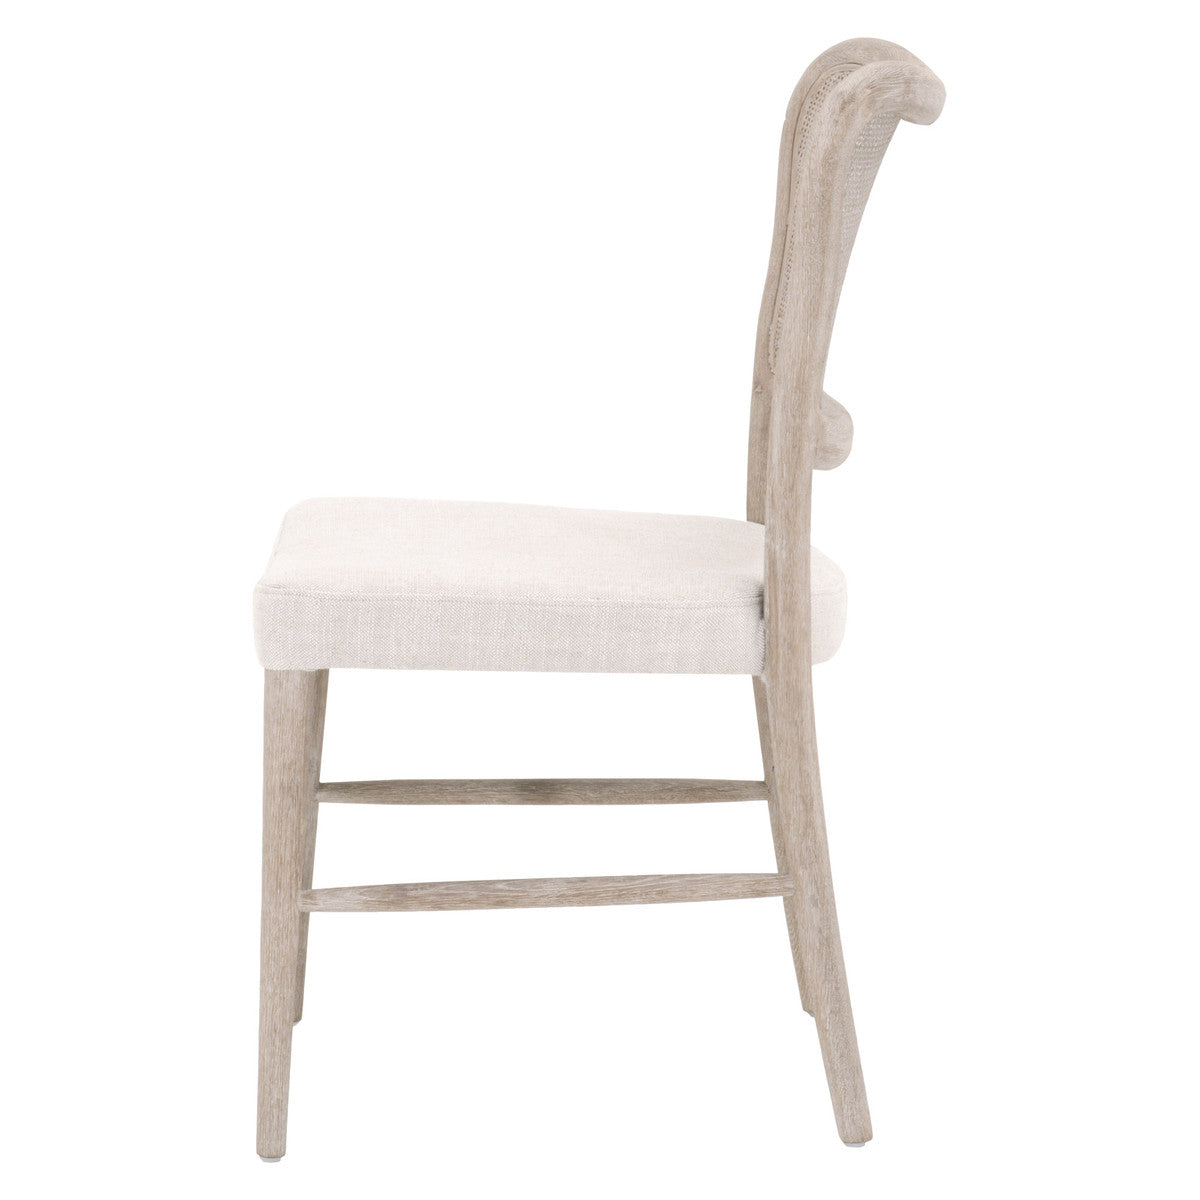 Cela Dining Chair in Bisque, Natural Gray Oak, Natural Gray Cane, Set of 2 - 6661.BISQ/NG